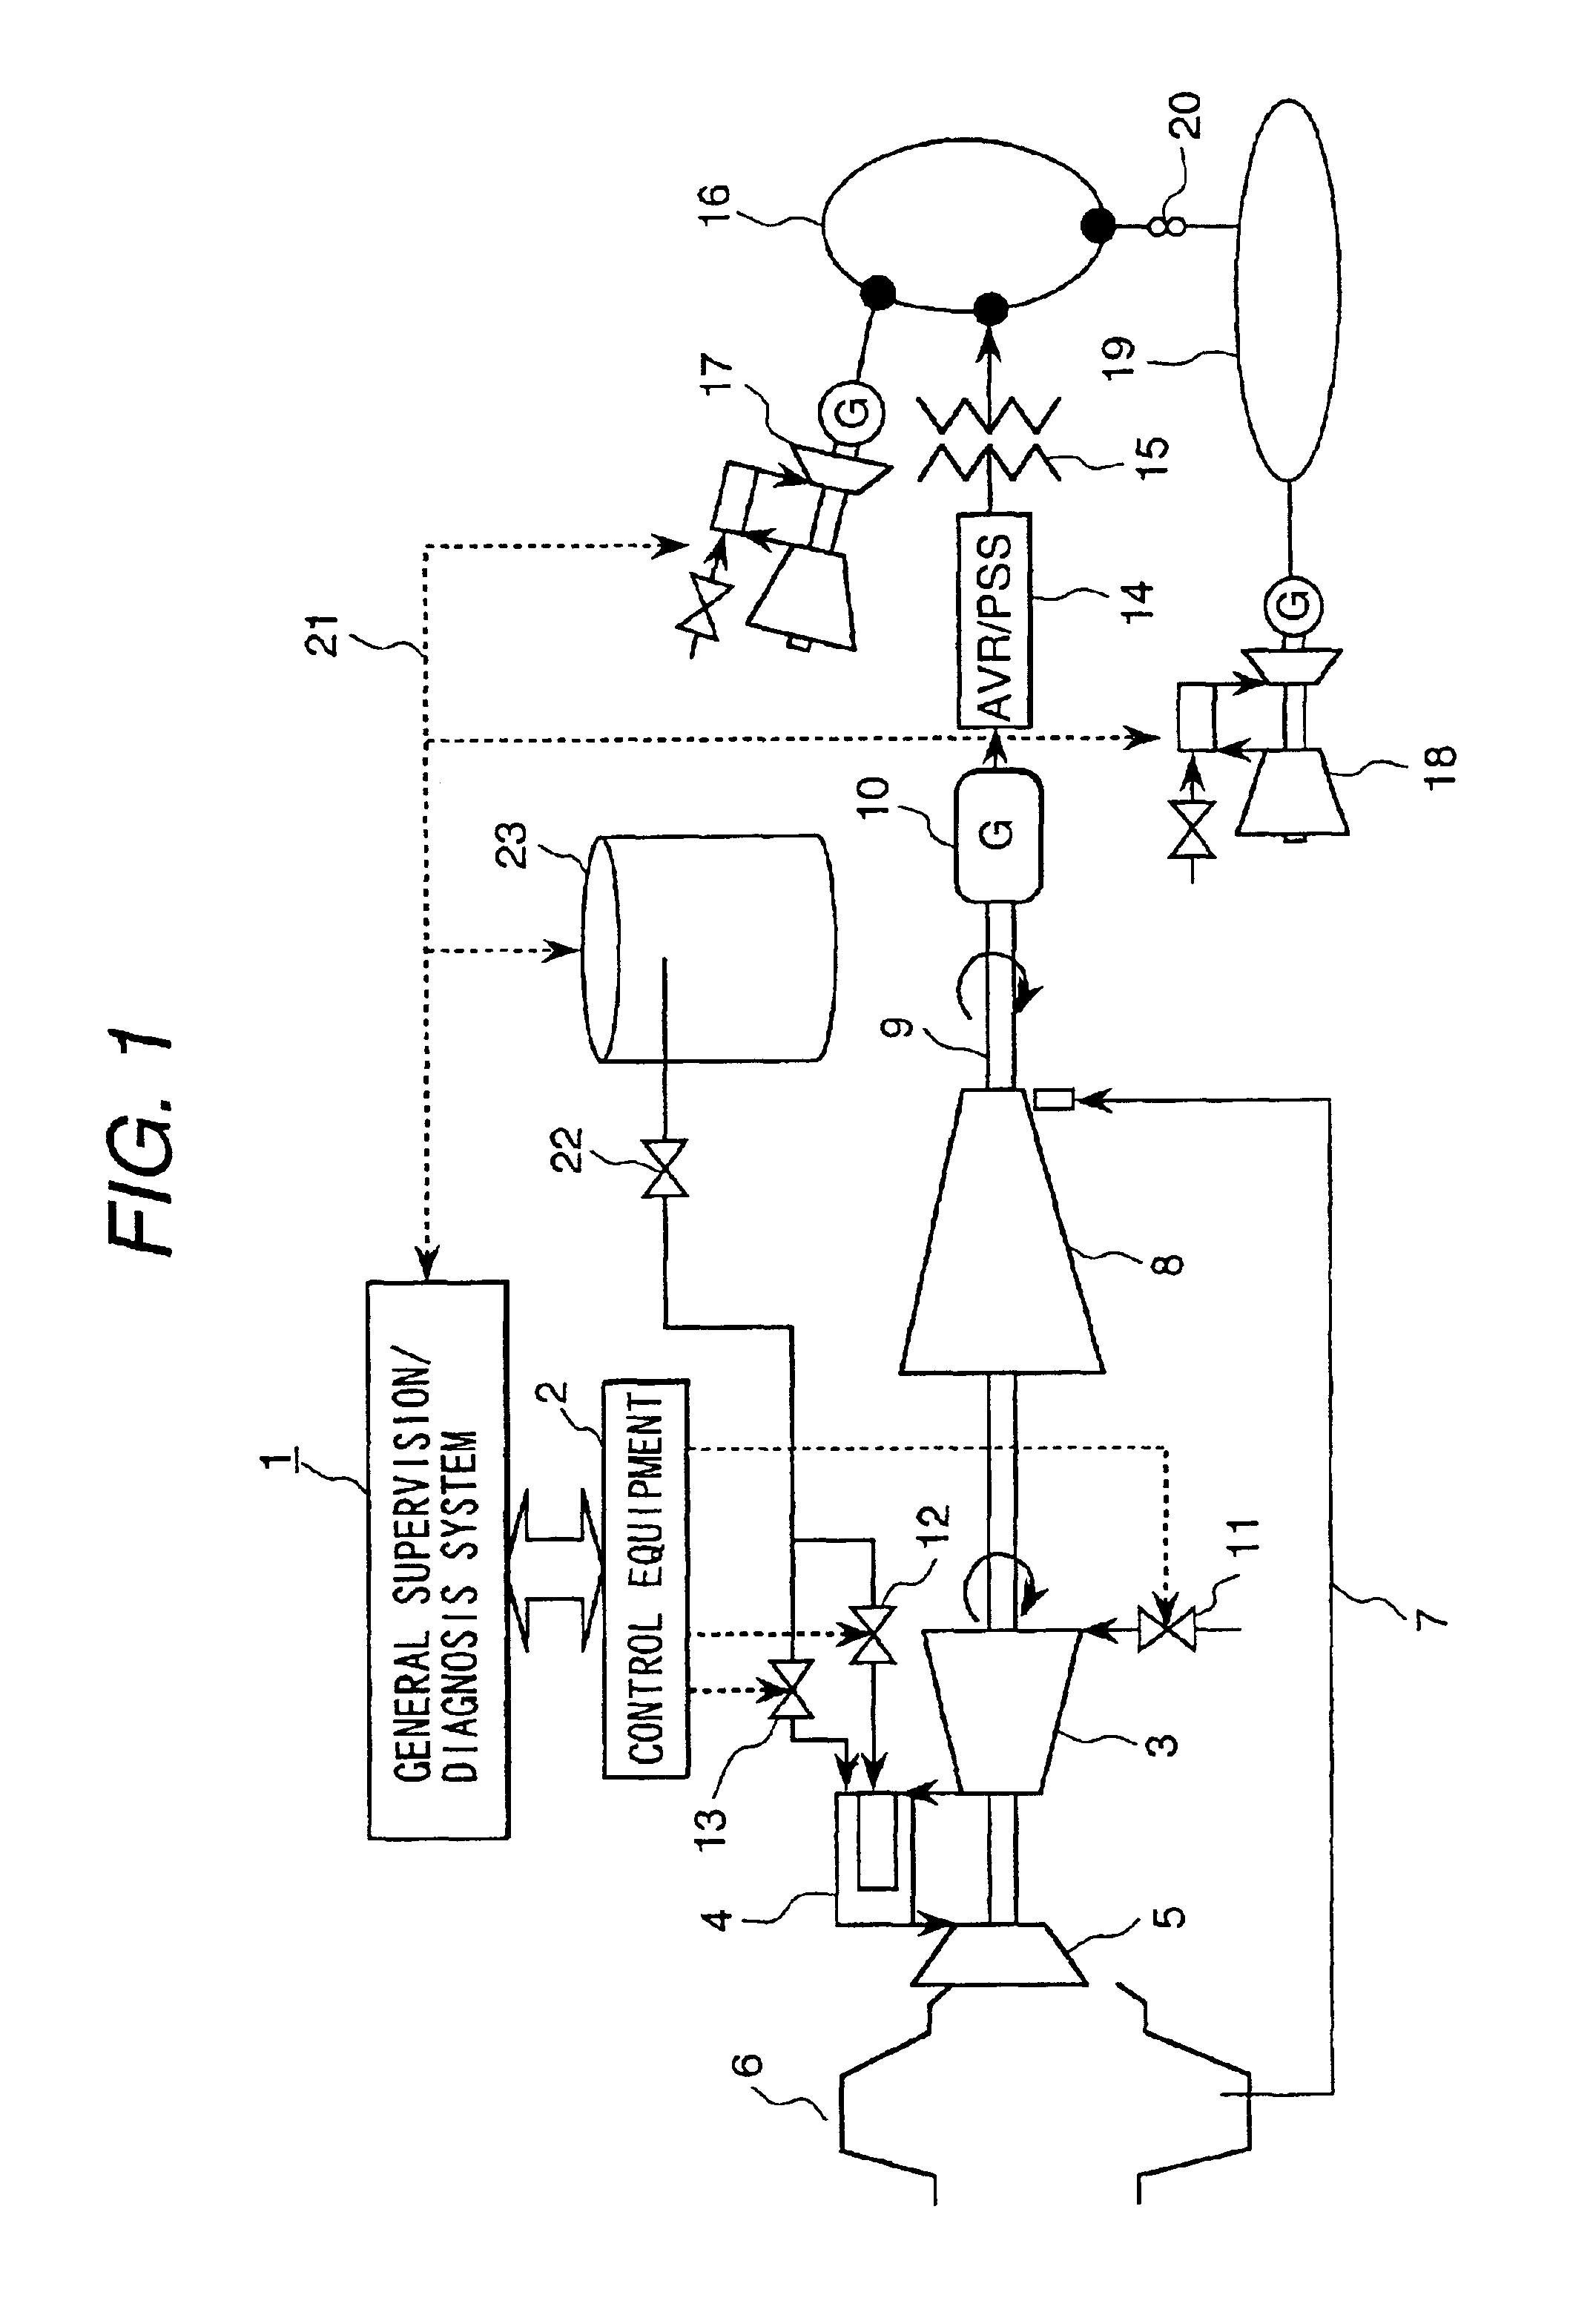 Power plant operation control system and a power plant maintaining and managing method